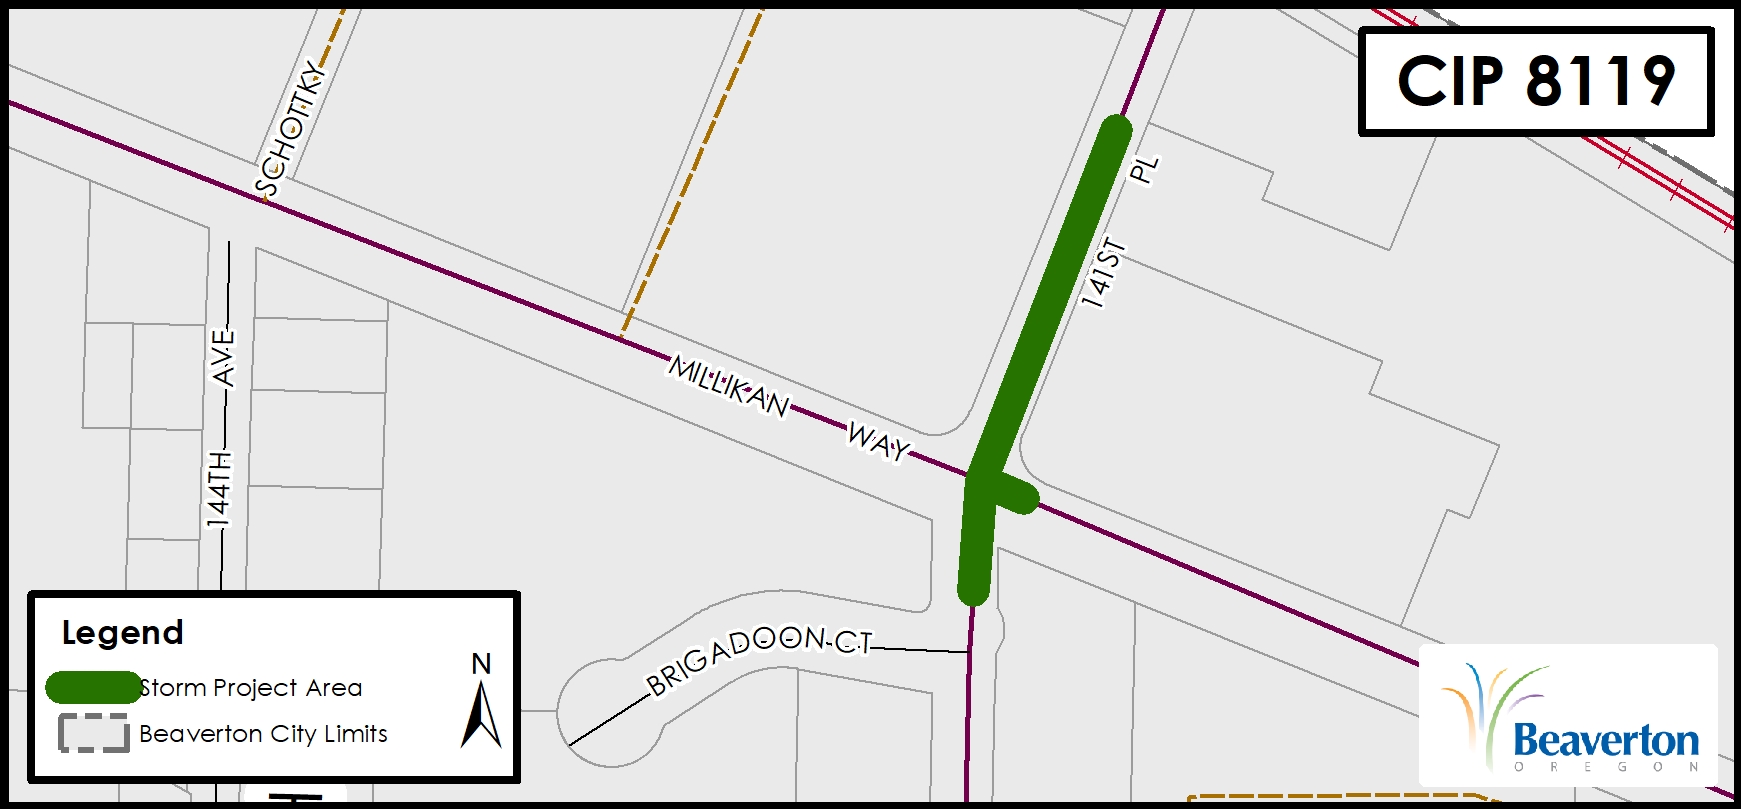 CIP 8119 Project Map for SW 141st Pl at intersection of Millikan Way, between Brigadoon Ct and Max tracks.